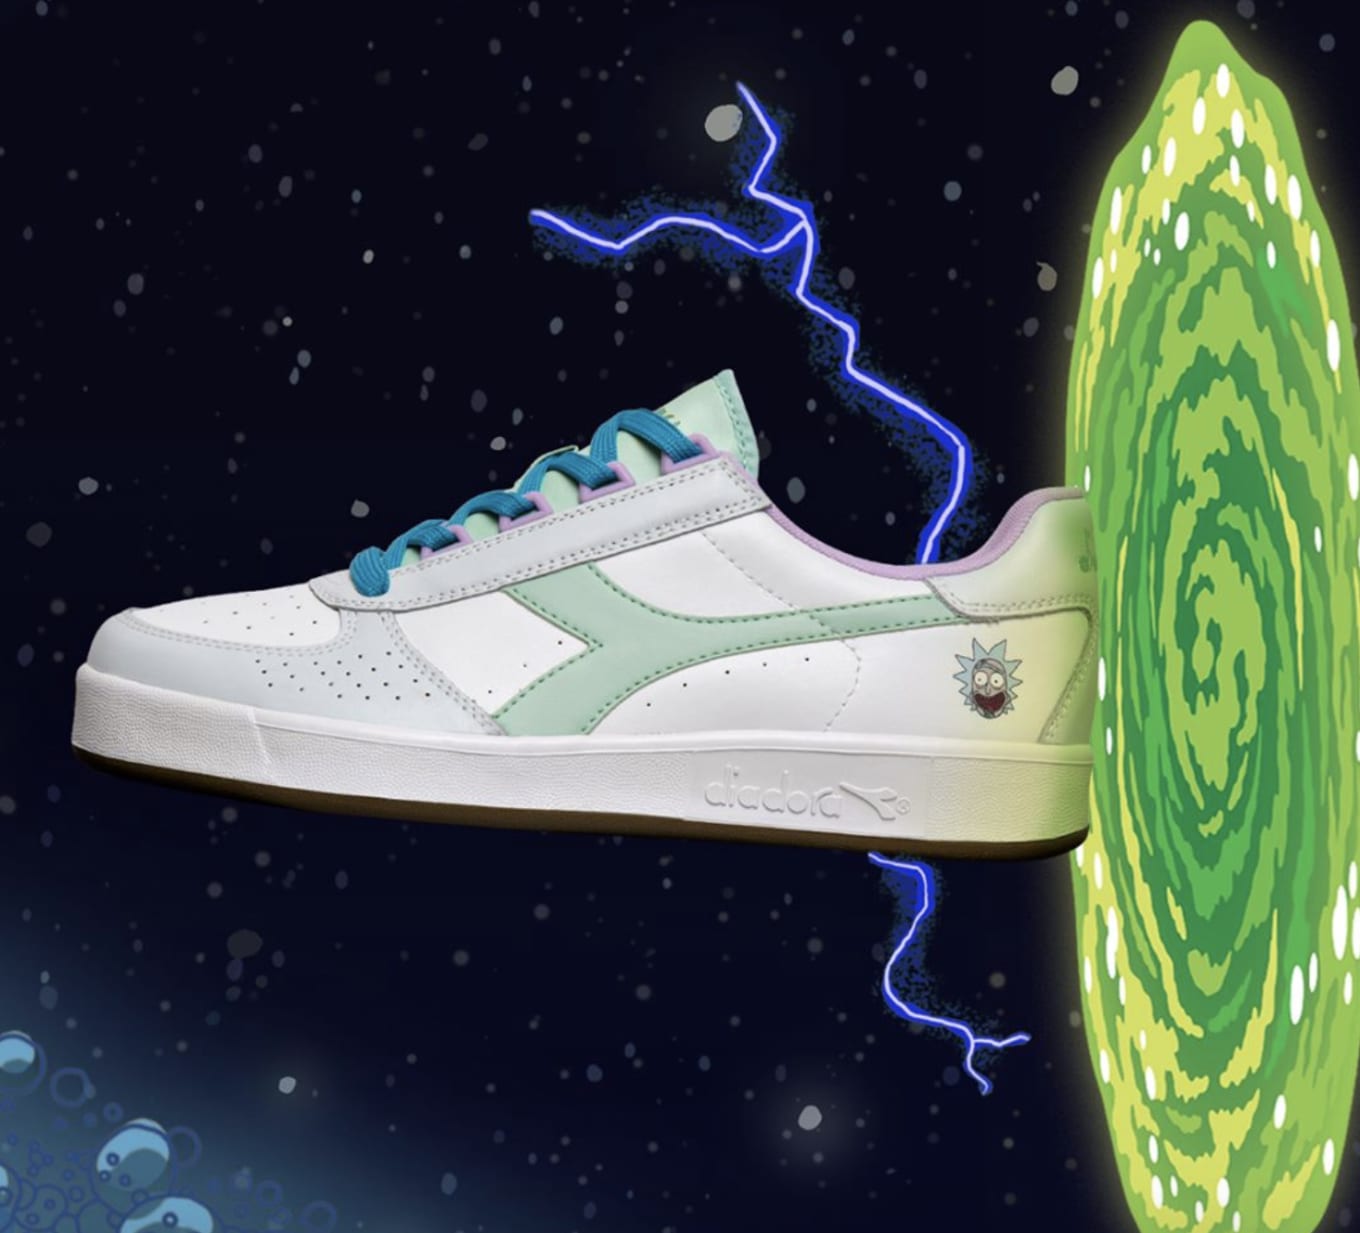 rick and morty adidas shoes